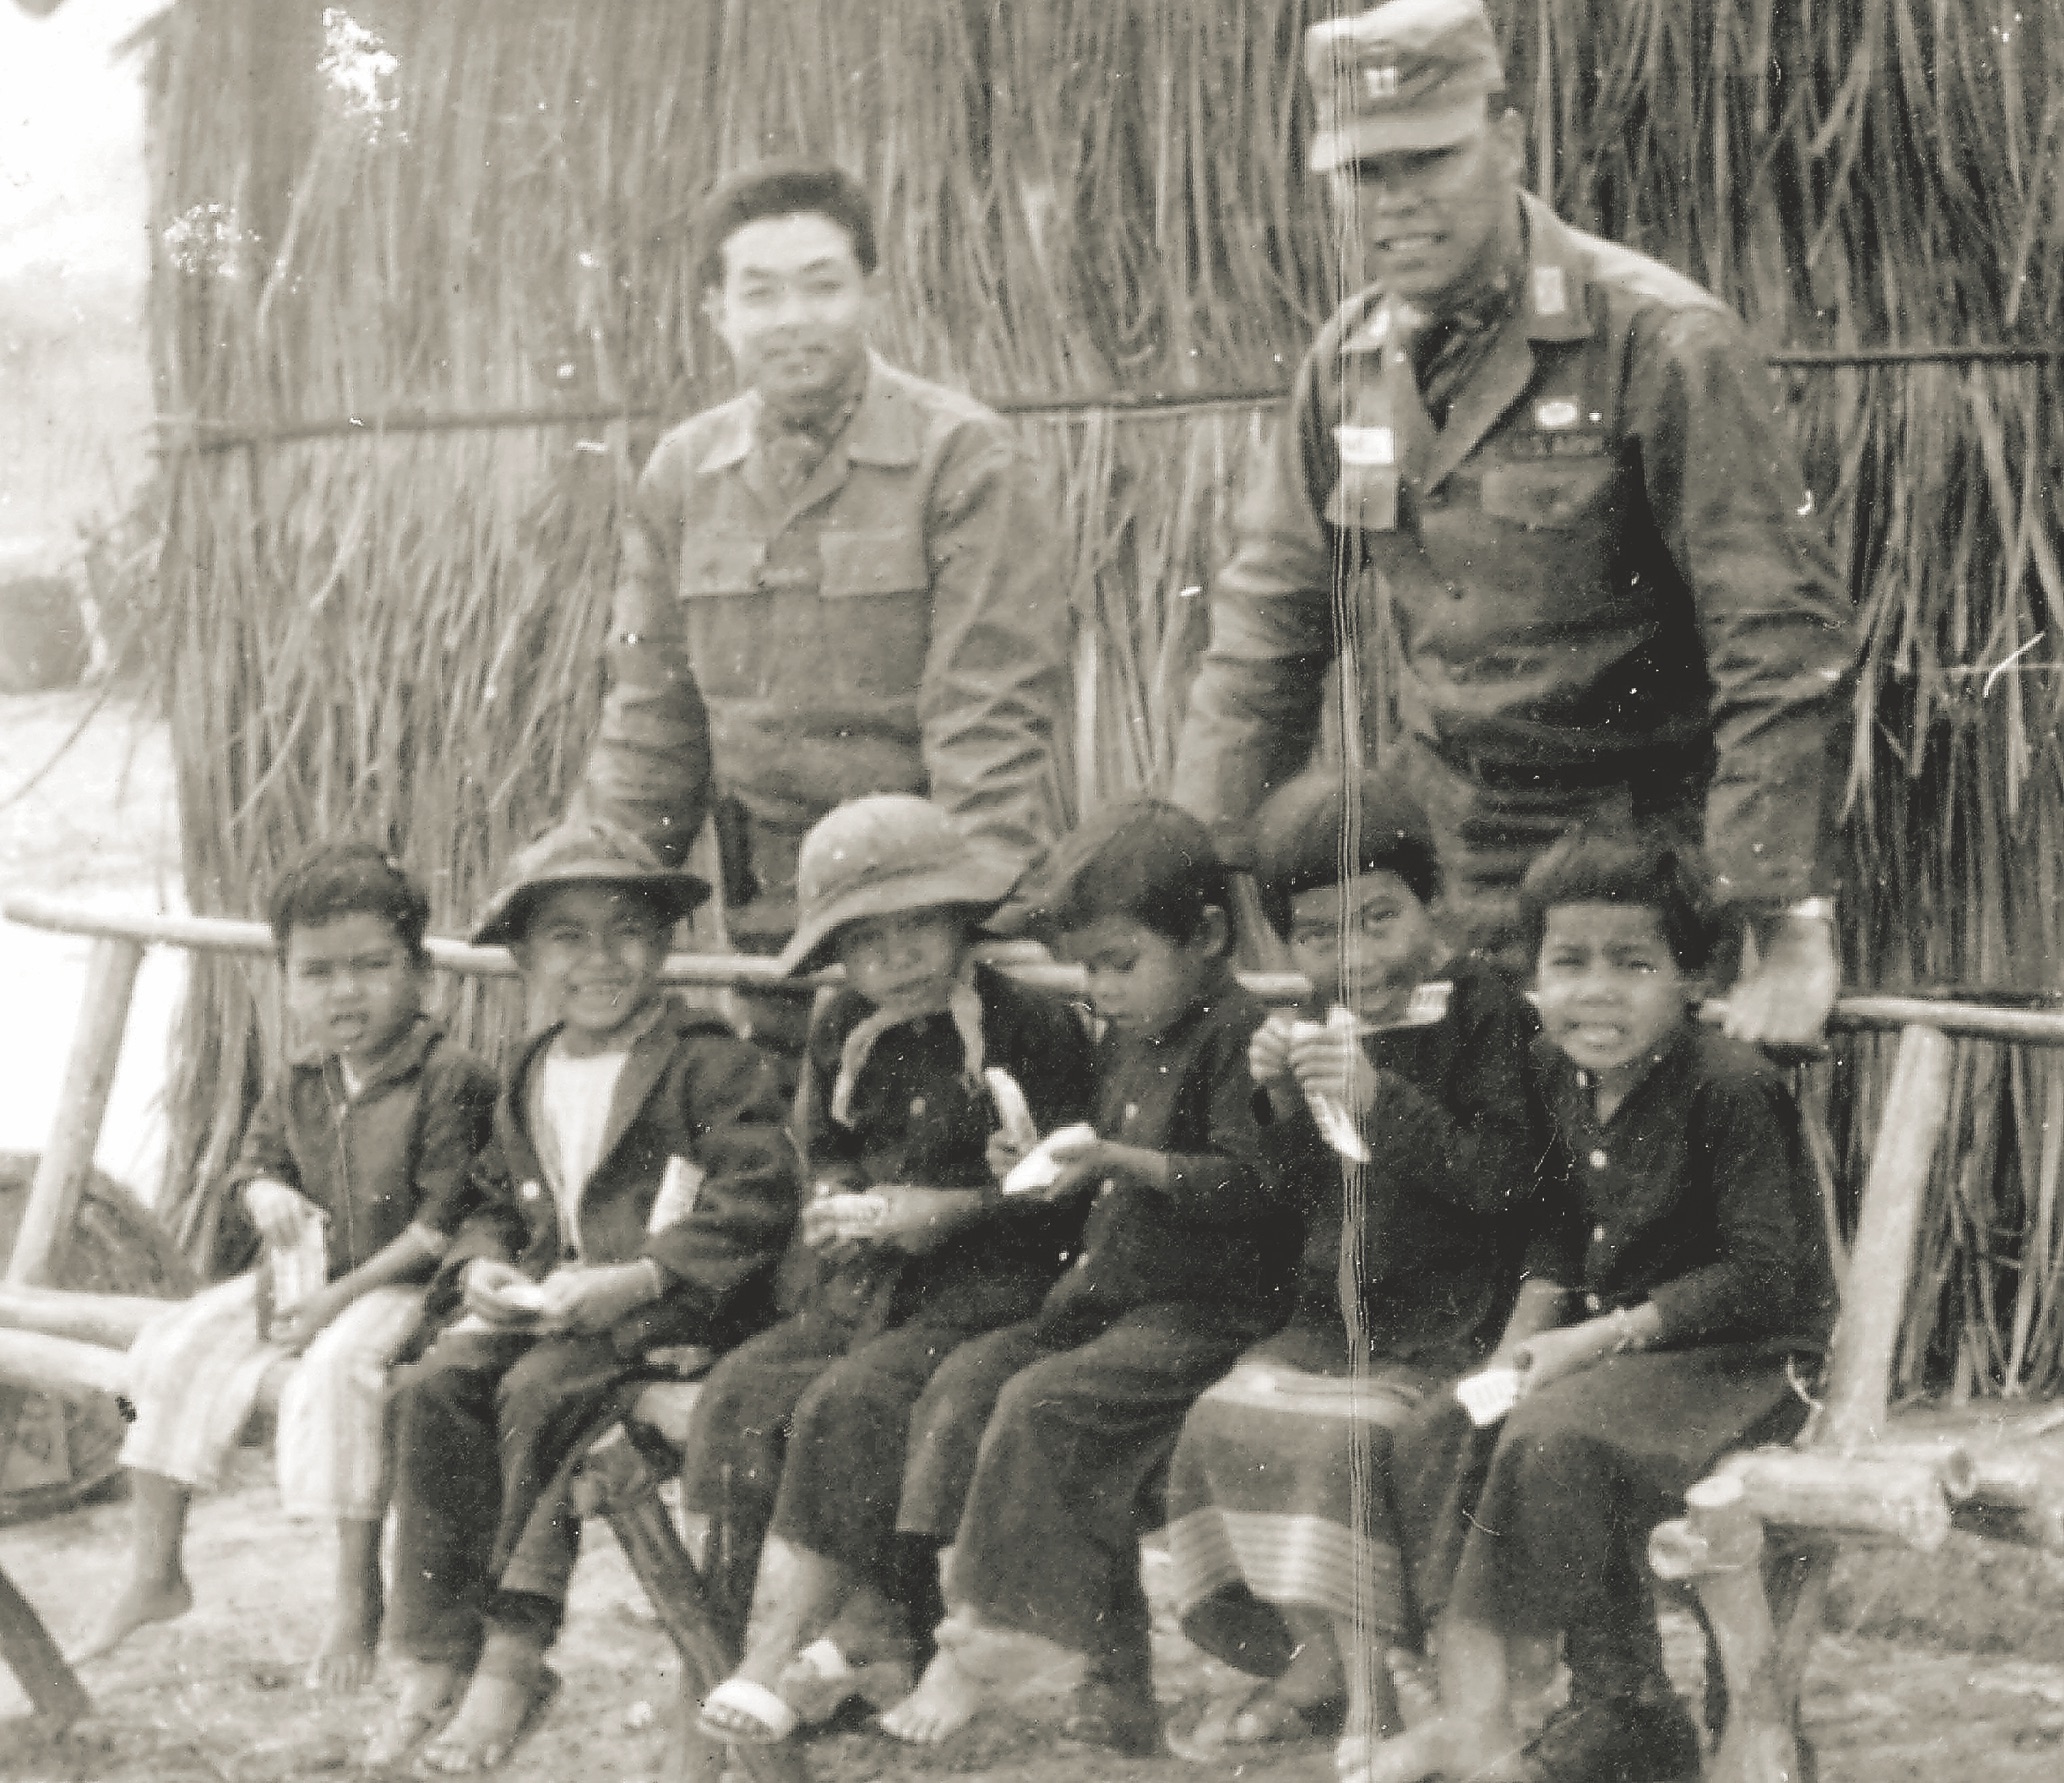 South Vietnamese battalion commander Capt. Vo Cong Hieu, at left, and his American adviser developed a good rapport, but Powell had less respect for the leadership abilities of two other unit leaders he advised. Powell and Hiu visited the children of an A Shau Valley tribe in 1963. (Courtesy Colin Powell)